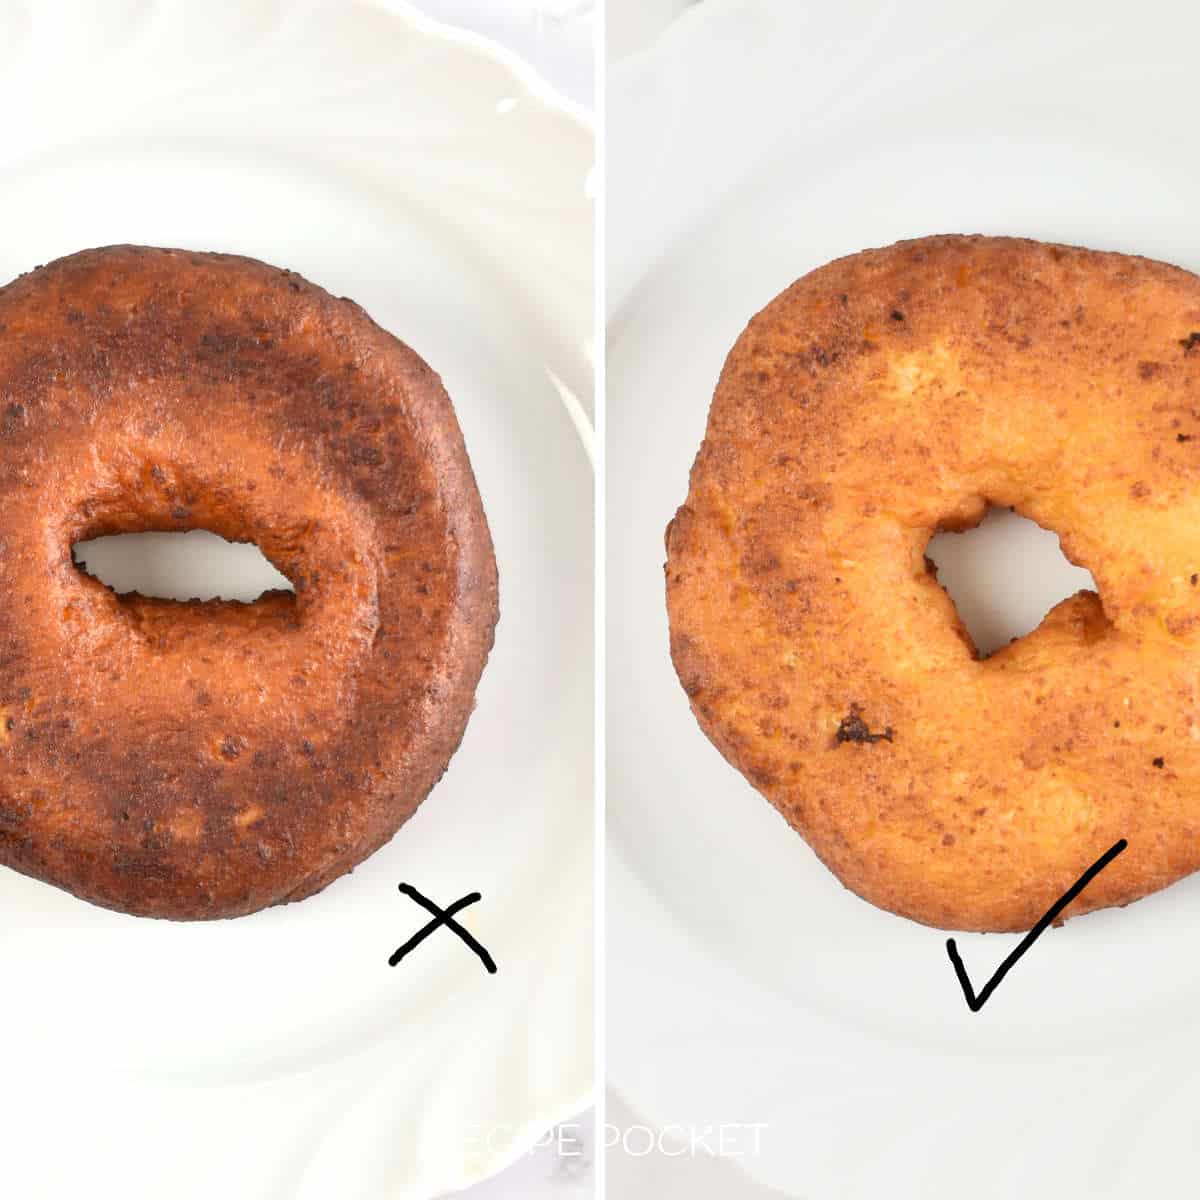 Image showing and over cooked donut and a properly cooked donut.